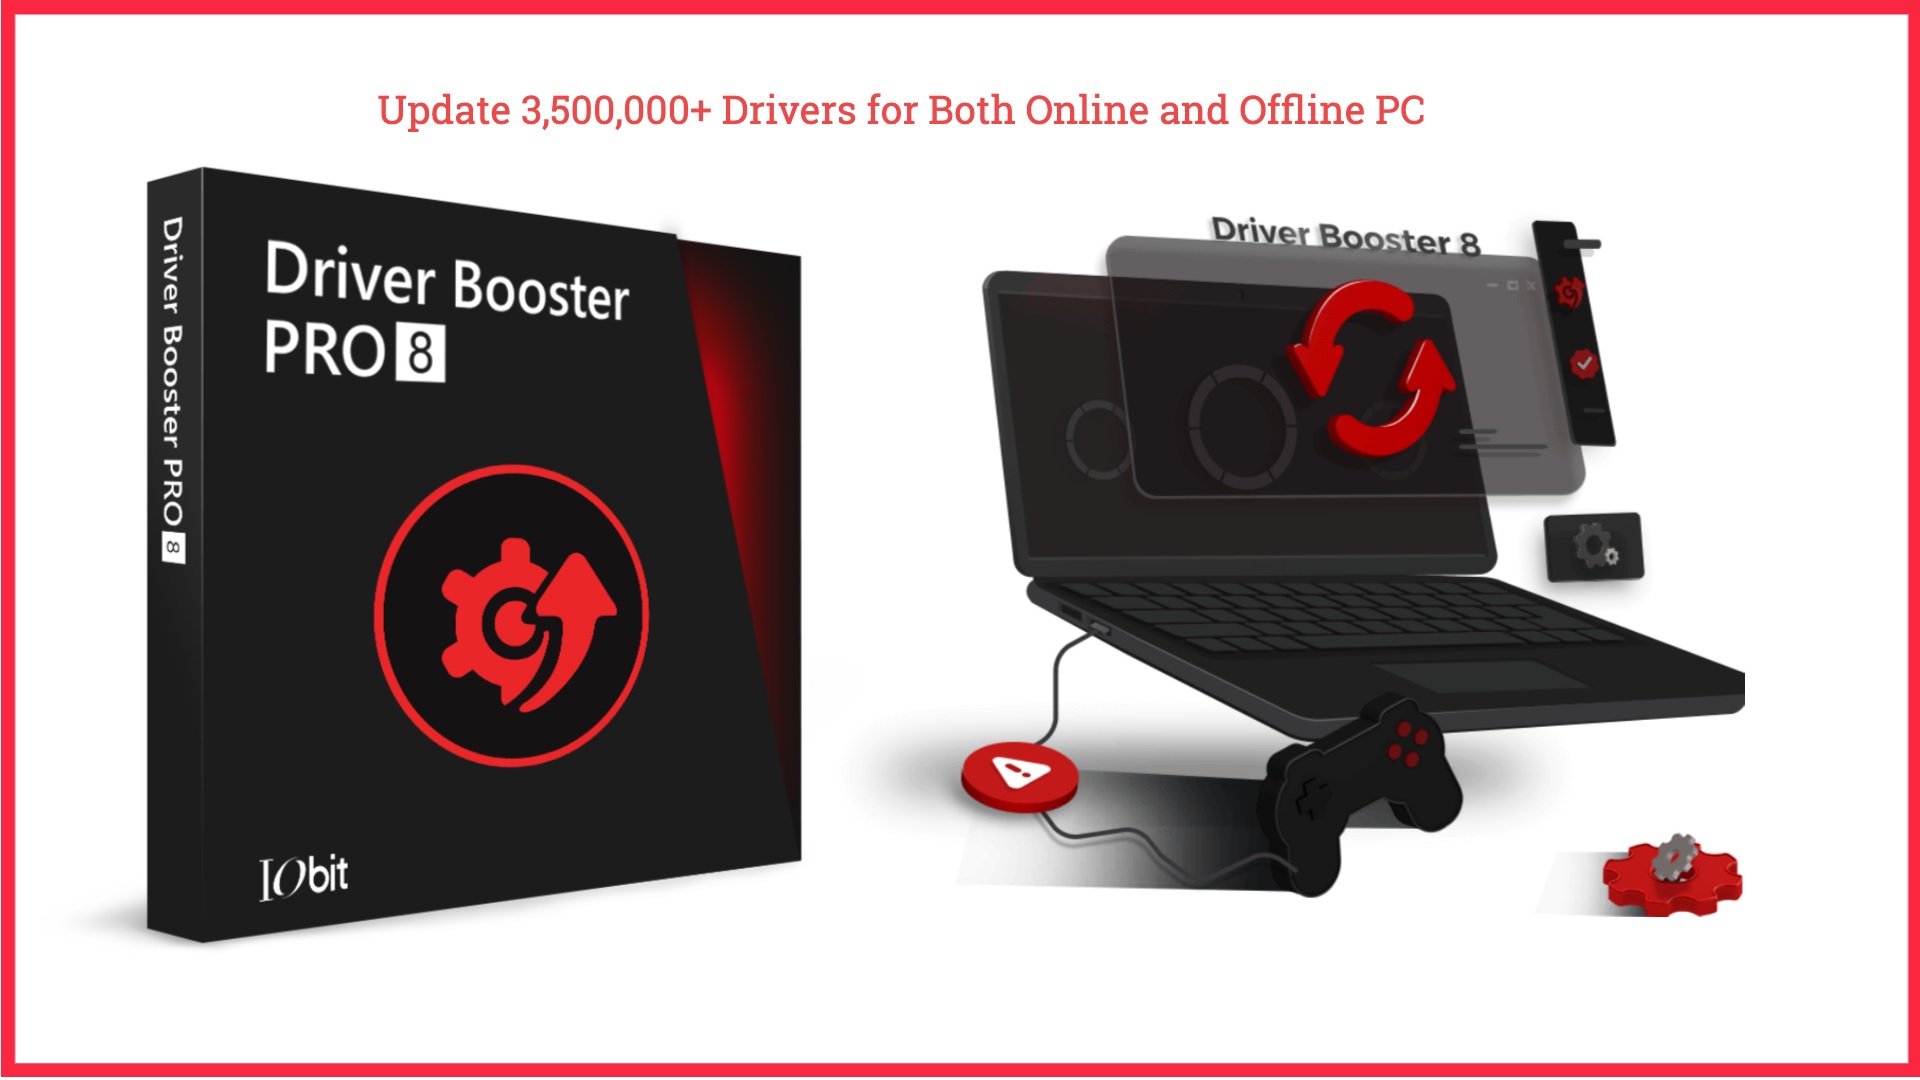 IOBIT GAME BOOSTER DOWNLOAD 2023